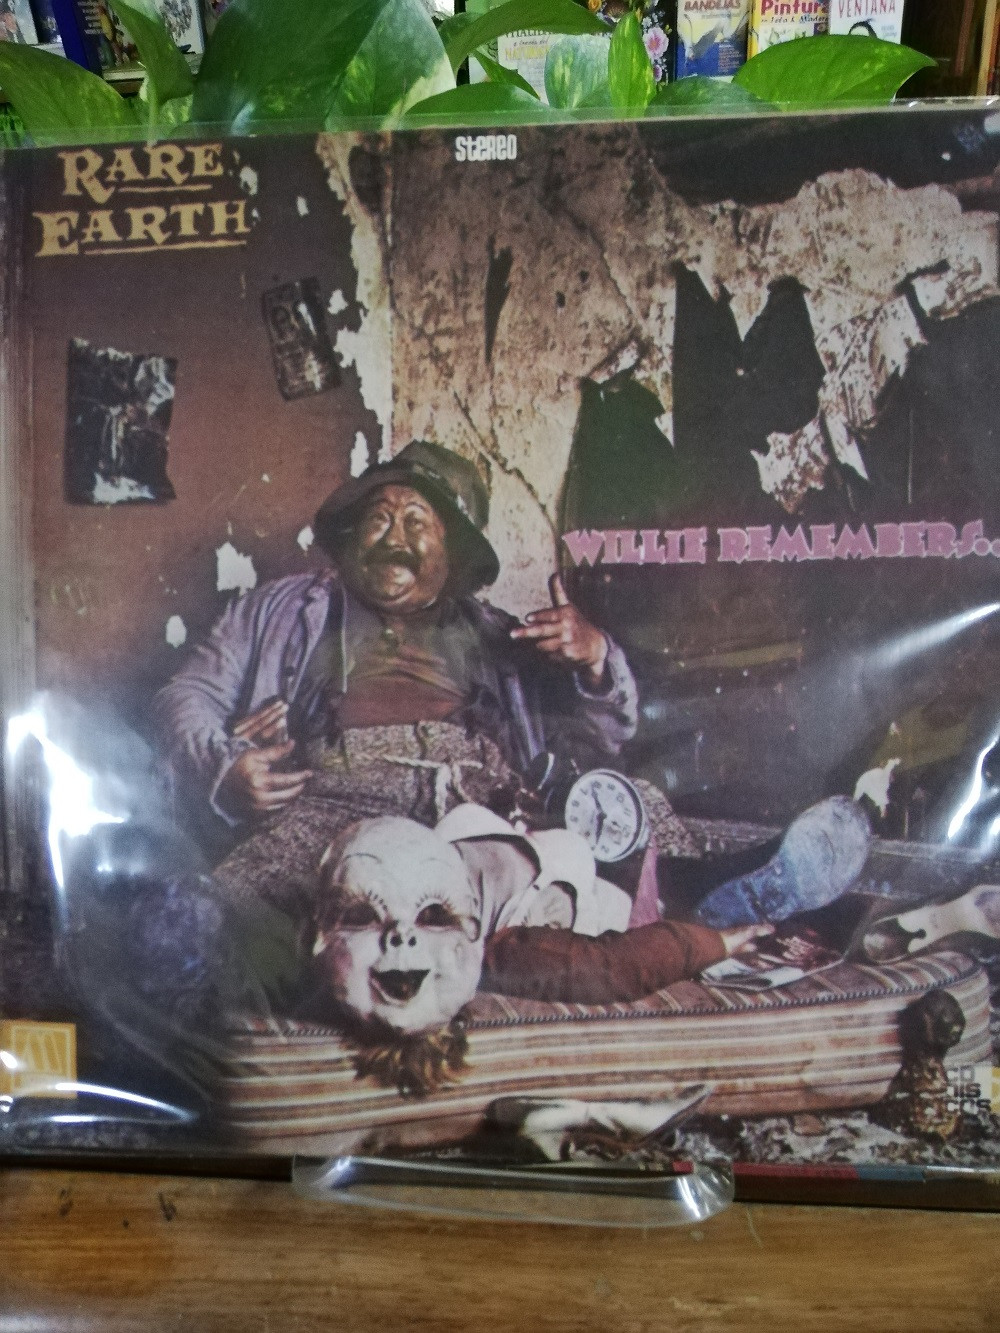 Imagen LP RARE EARTH - WILLIE REMEMBERS... 1